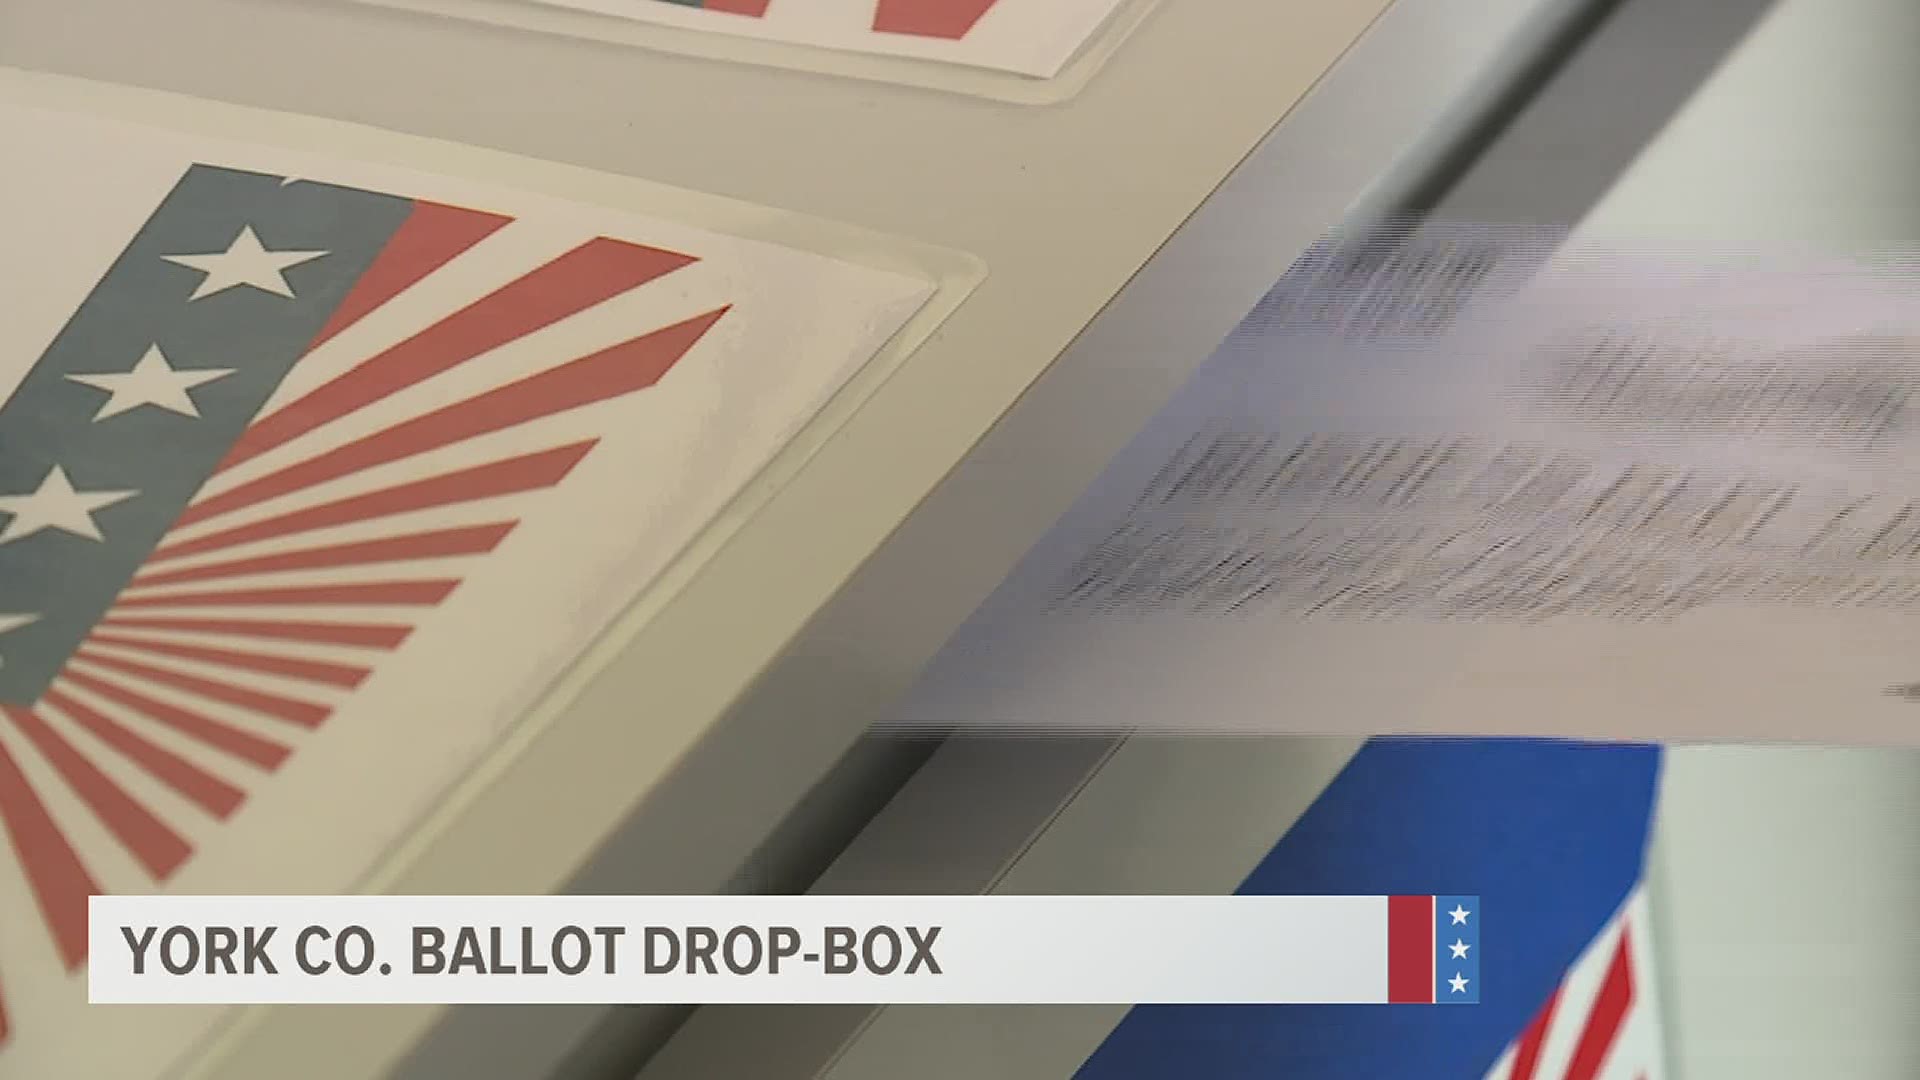 FOX43 spoke to President Commissioner Julie Wheeler after some voters saw a K9 officer near the ballot drop-box over the weekend.